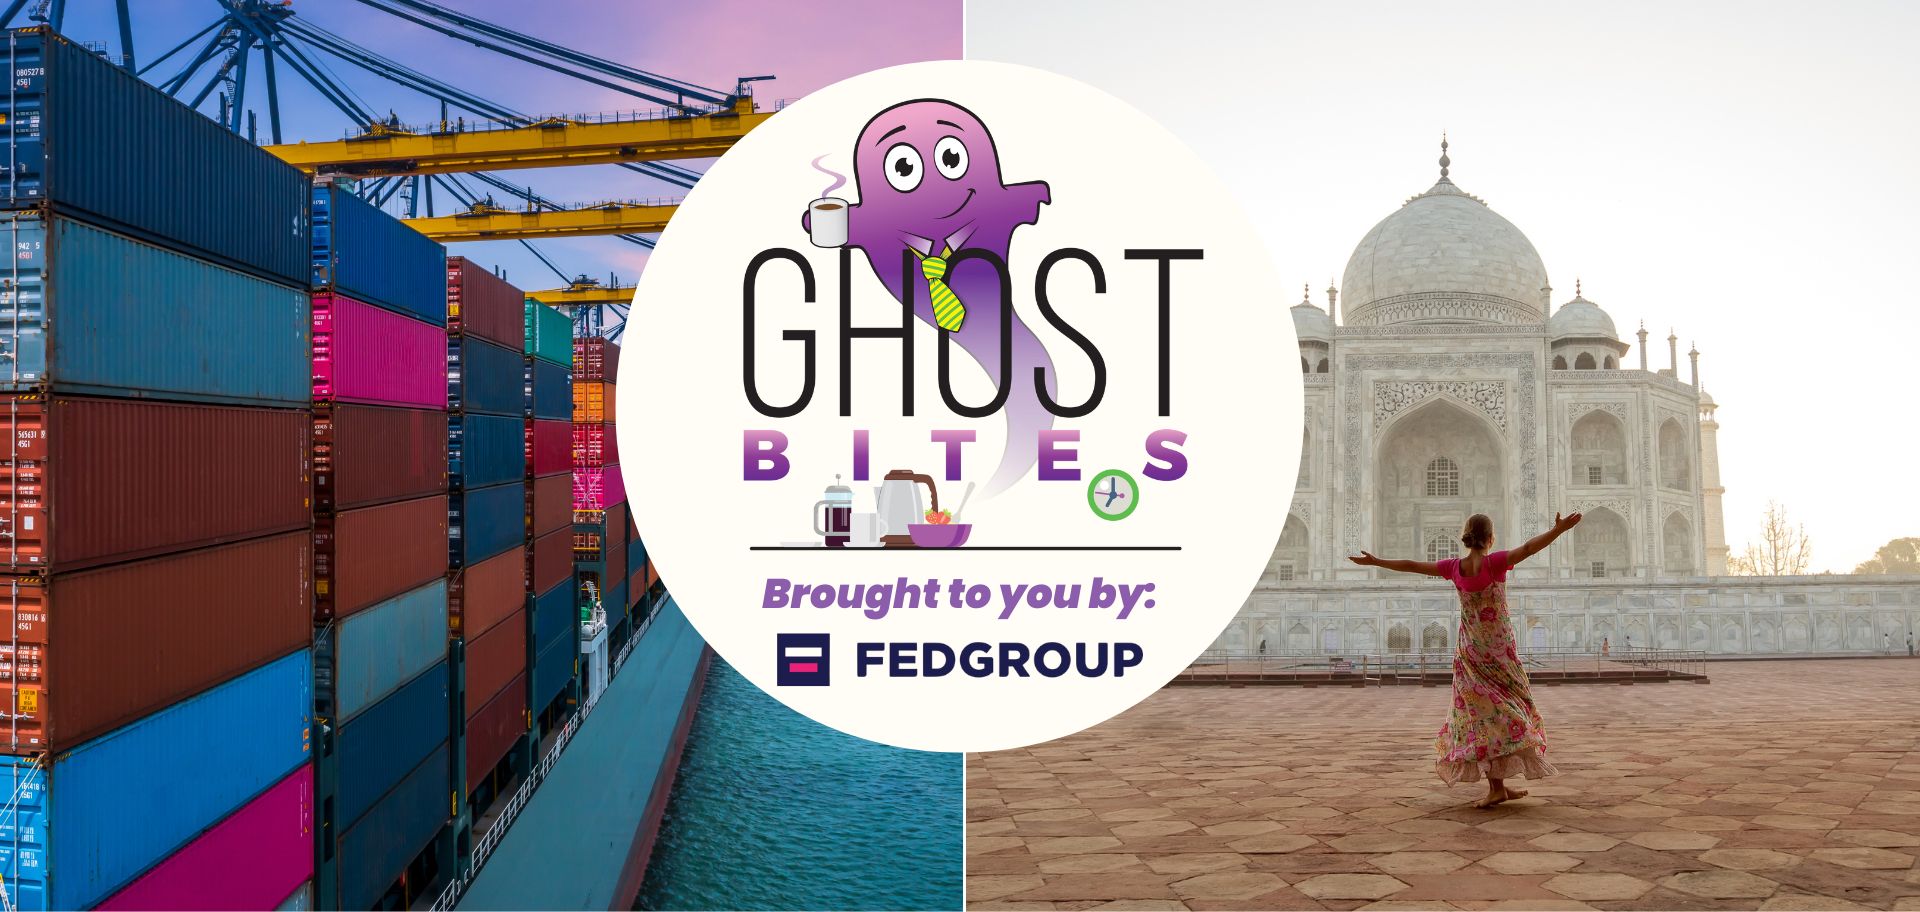 Ghost Bites (Grindrod Shipping | Sanlam)